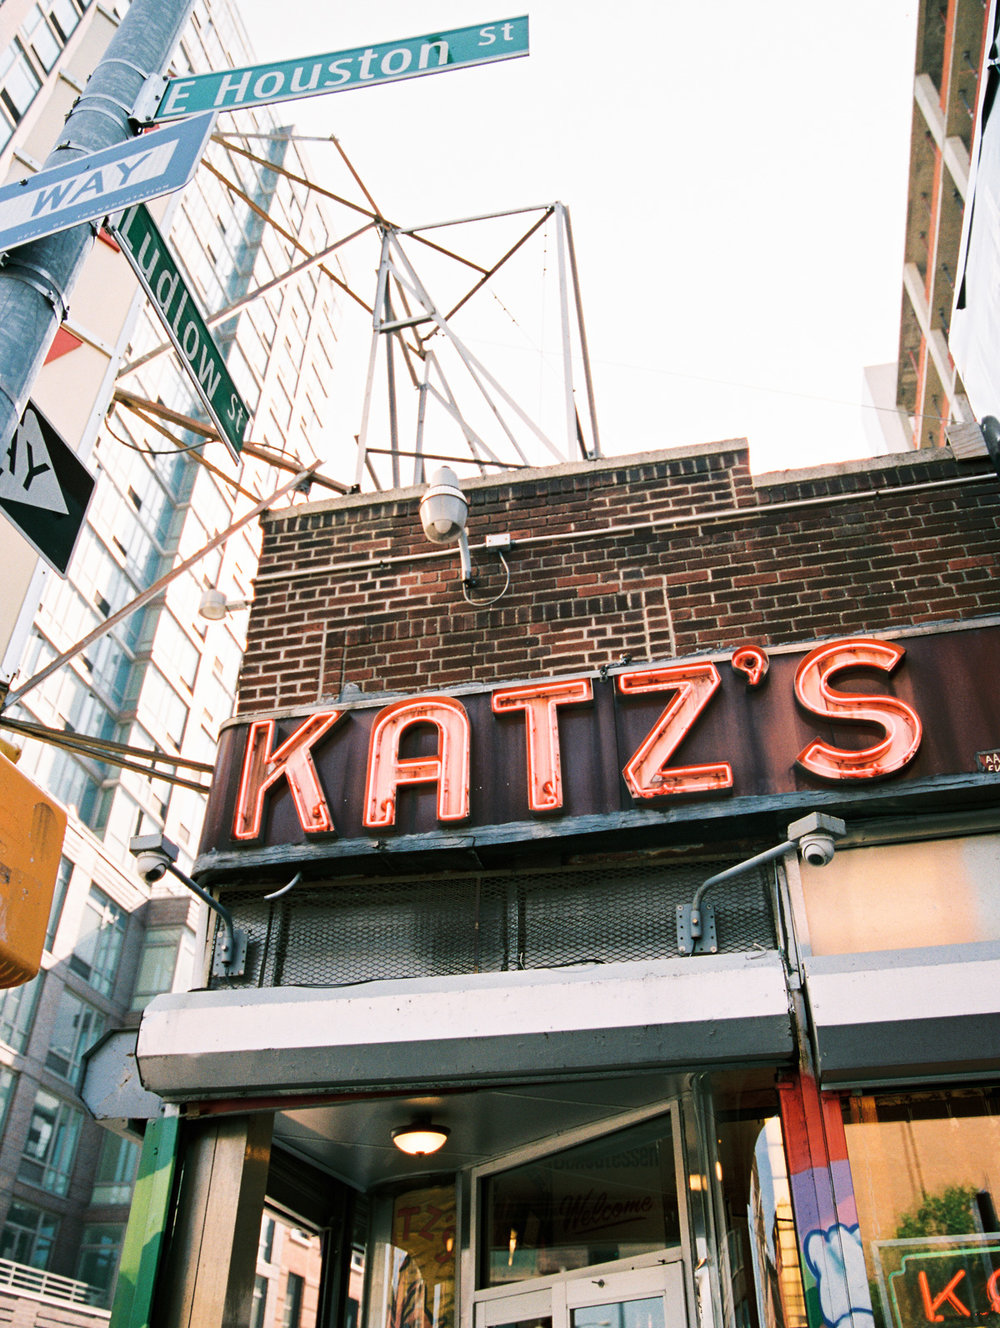  Katz's Deli. Seriously the best sandwiches ever. If you go to New York, you have to plan a meal at Katz's!&nbsp; 